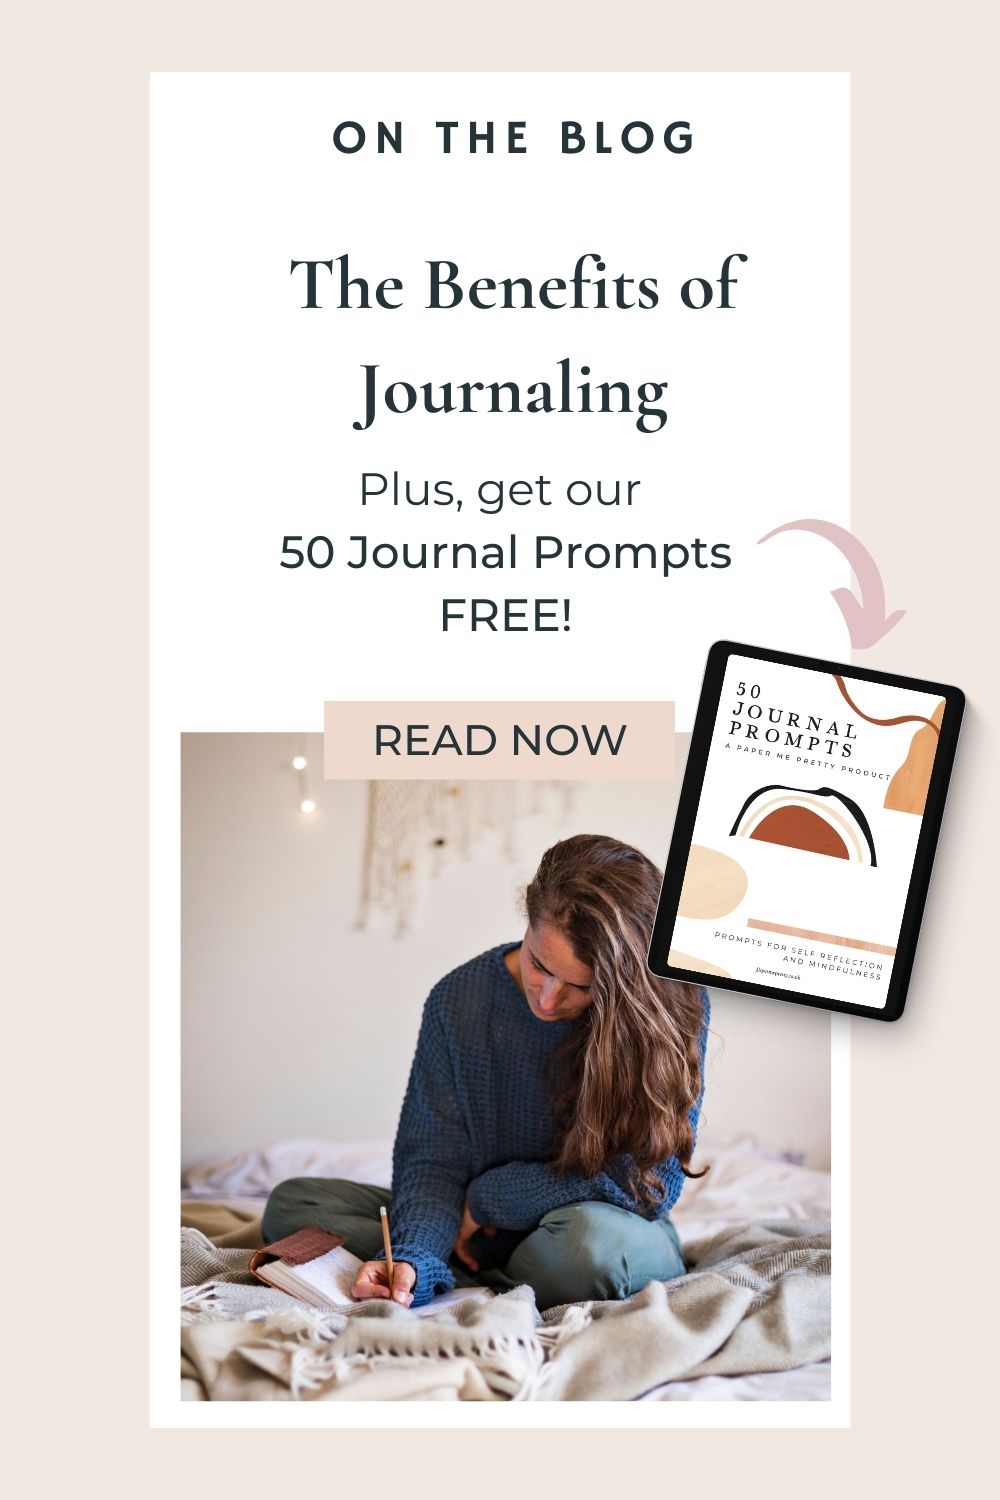 If you're looking to build a habit that will benefit you in a ton of ways, I have to say that journaling is at the top of the list. Find out how journaling can help you, PLUS, get our 50 Journal Prompts FREE! #journaling #habits #successhabits #journal